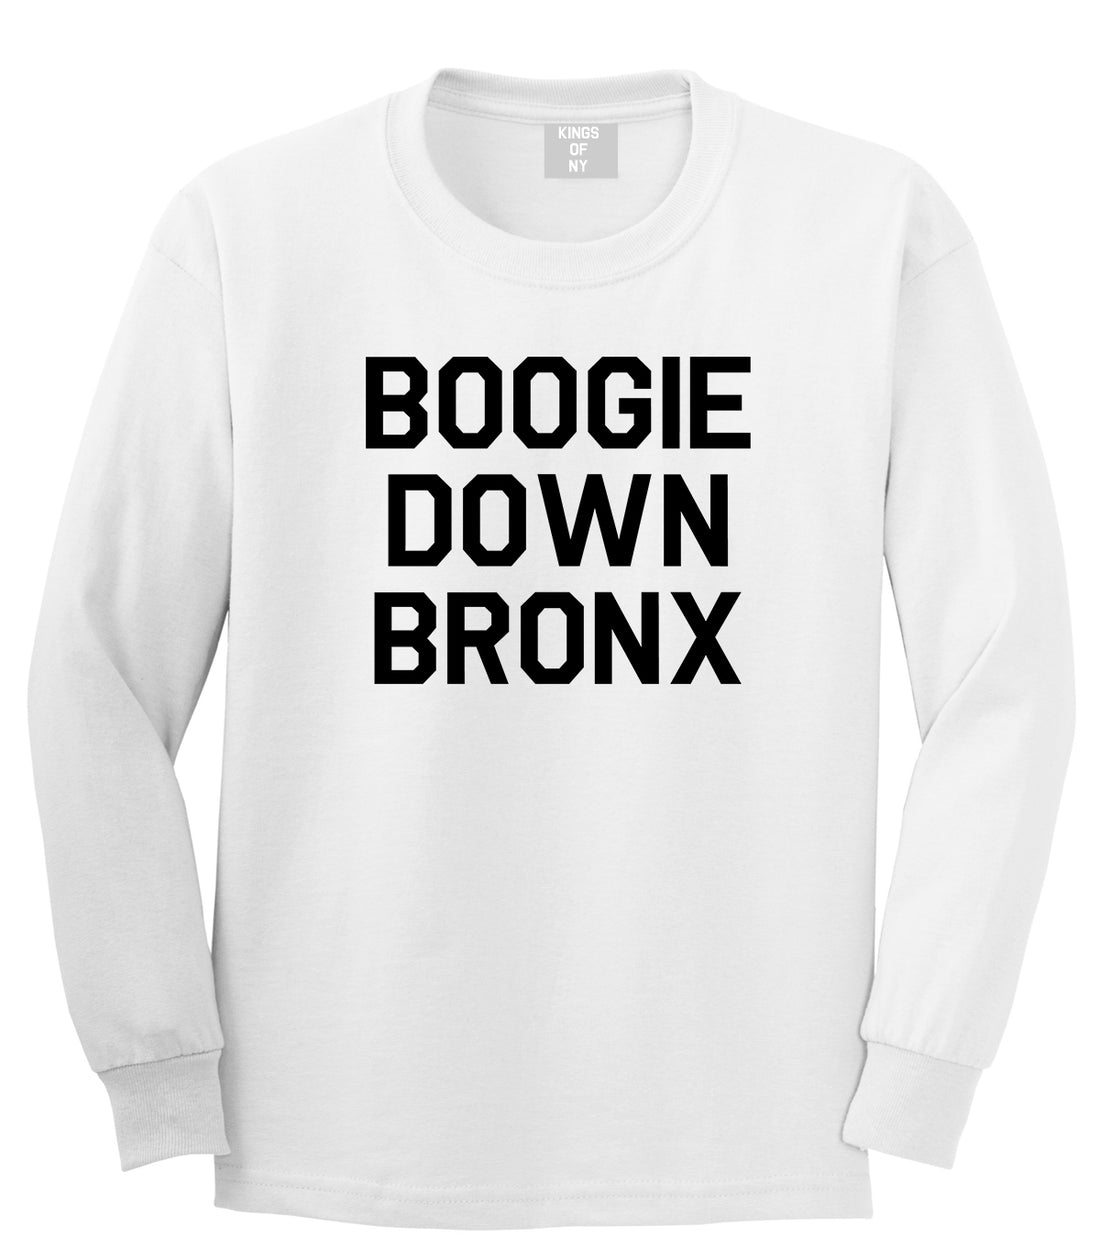 Boogie Down Bronx Mens Long Sleeve T-Shirt White by Kings Of NY